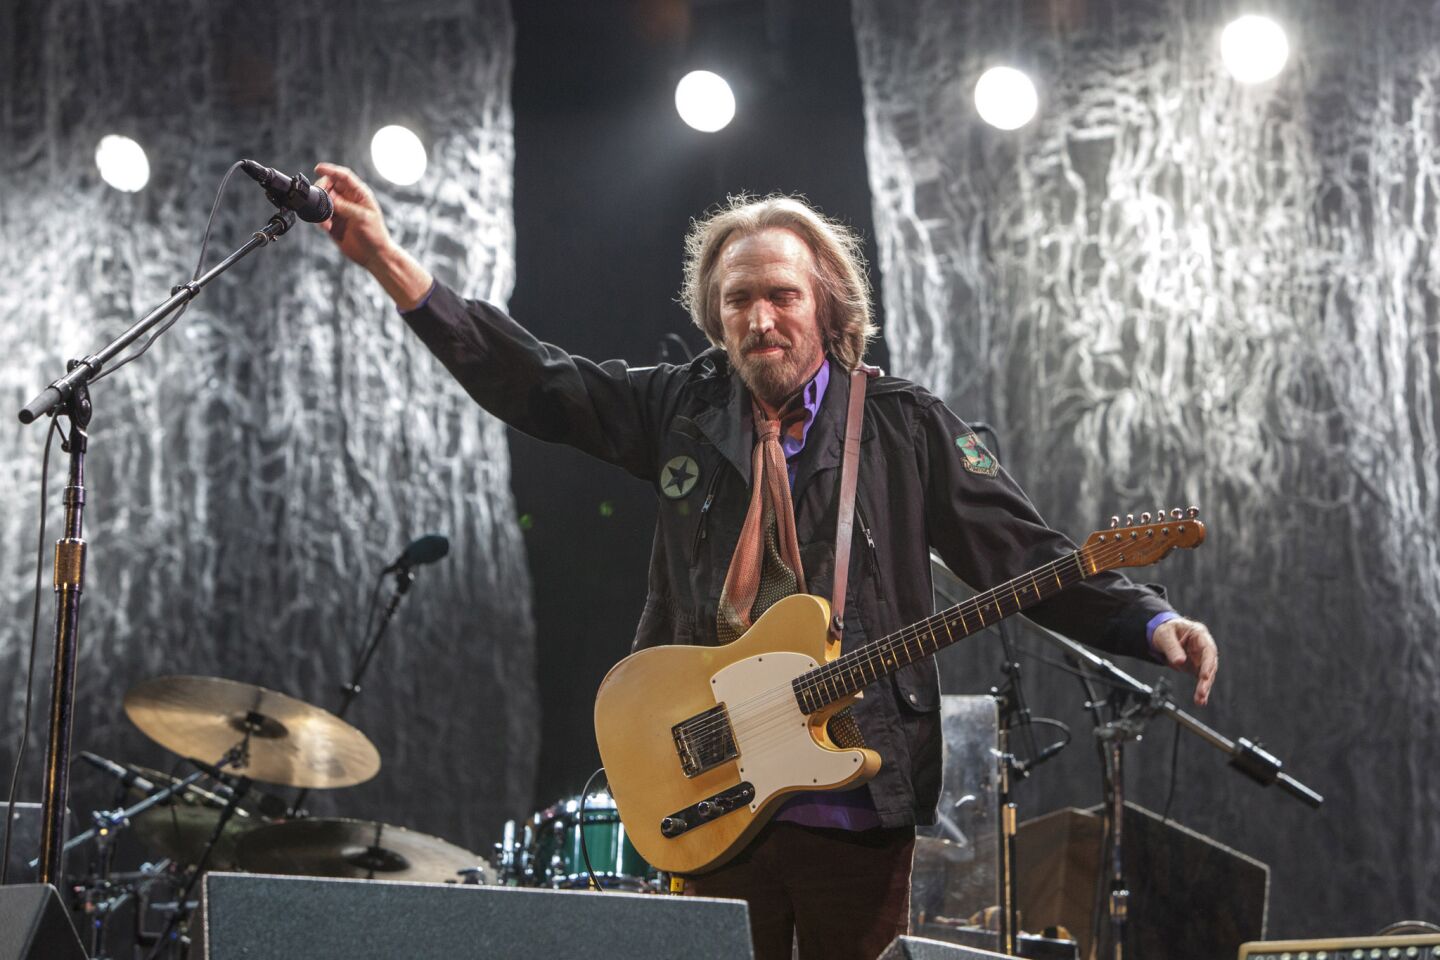 Tom Petty performs during the Hangout Music Festival on May 18, 2013, in Gulf Shores, Ala.